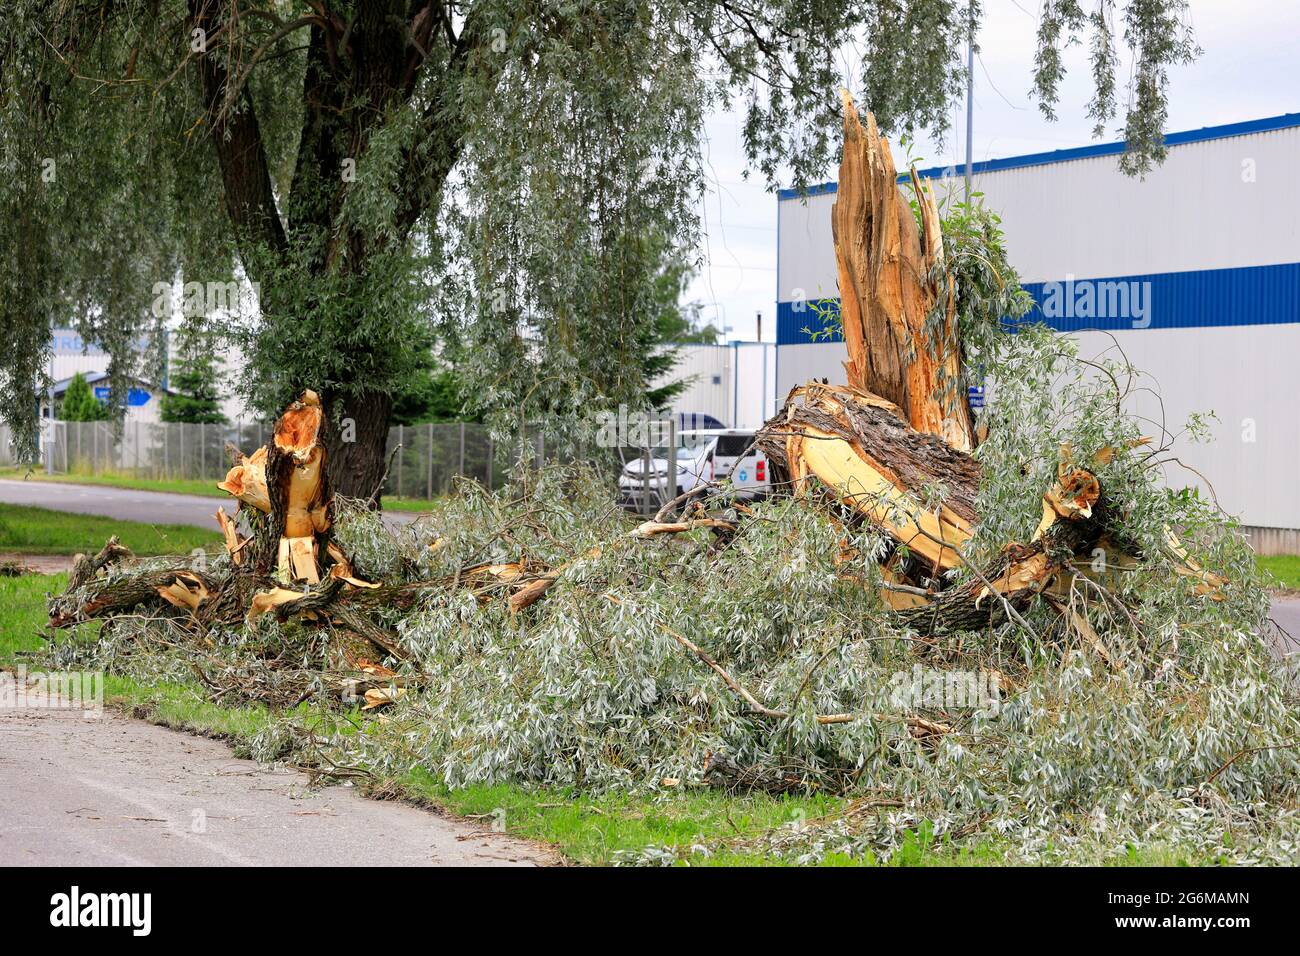 Fallen tree and damage by Satamakatu street, Meriniitty.  A severe thunderstorm on June 23rd caused damage in Salo, Finland. June 24, 2021. Stock Photo